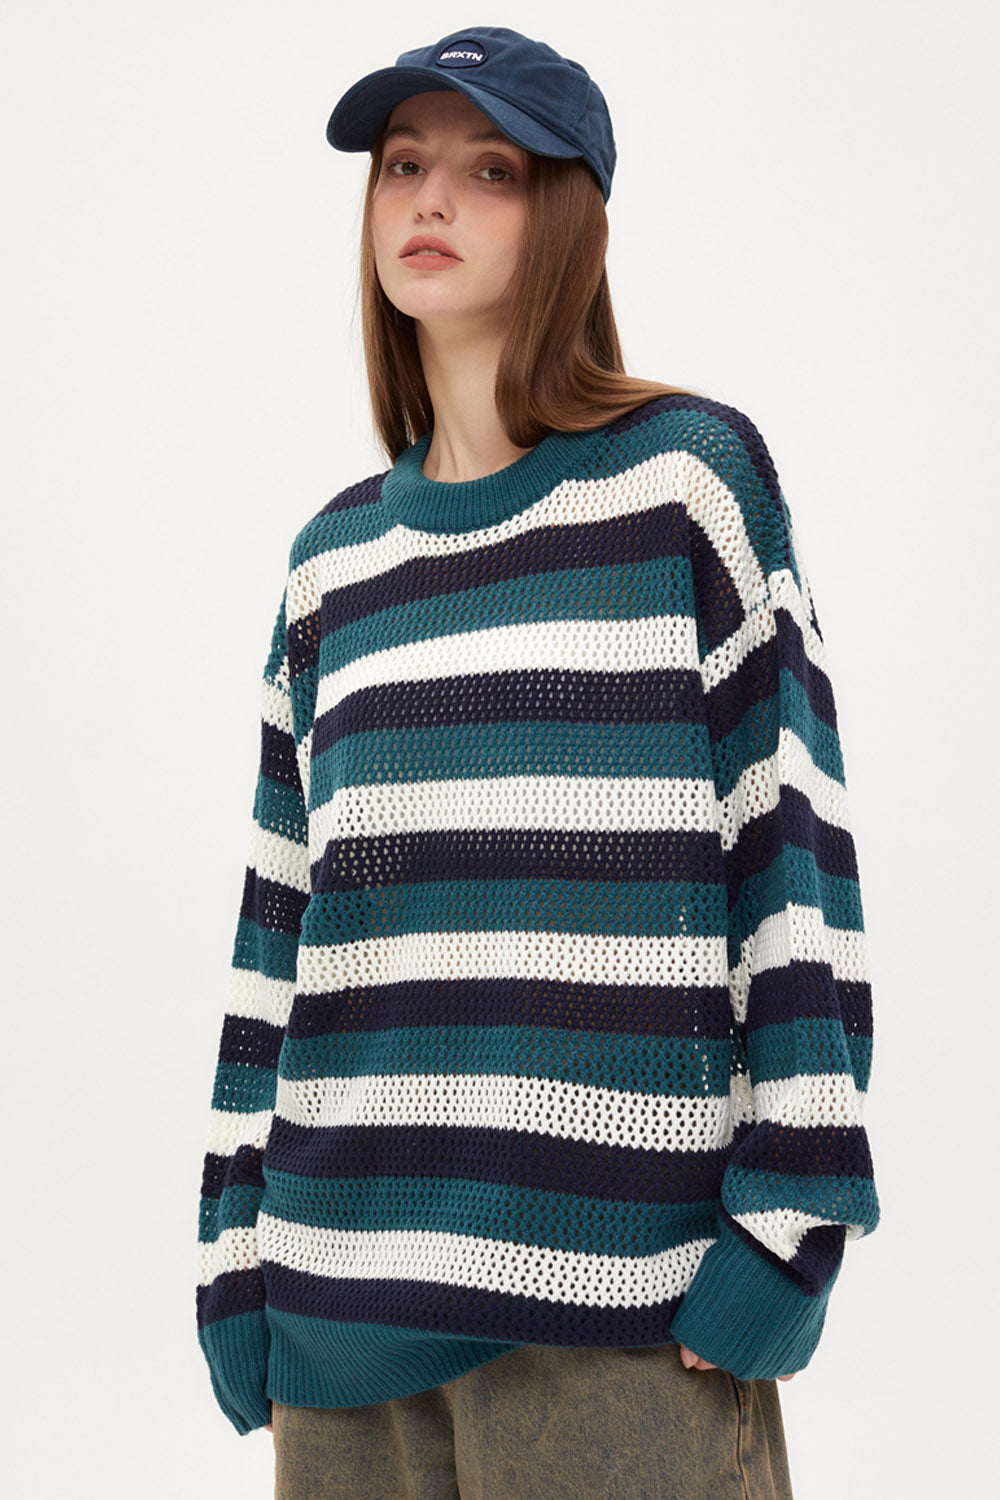 Stripe Hollow Out Pullover Knitted Unisex Oversized Sweater